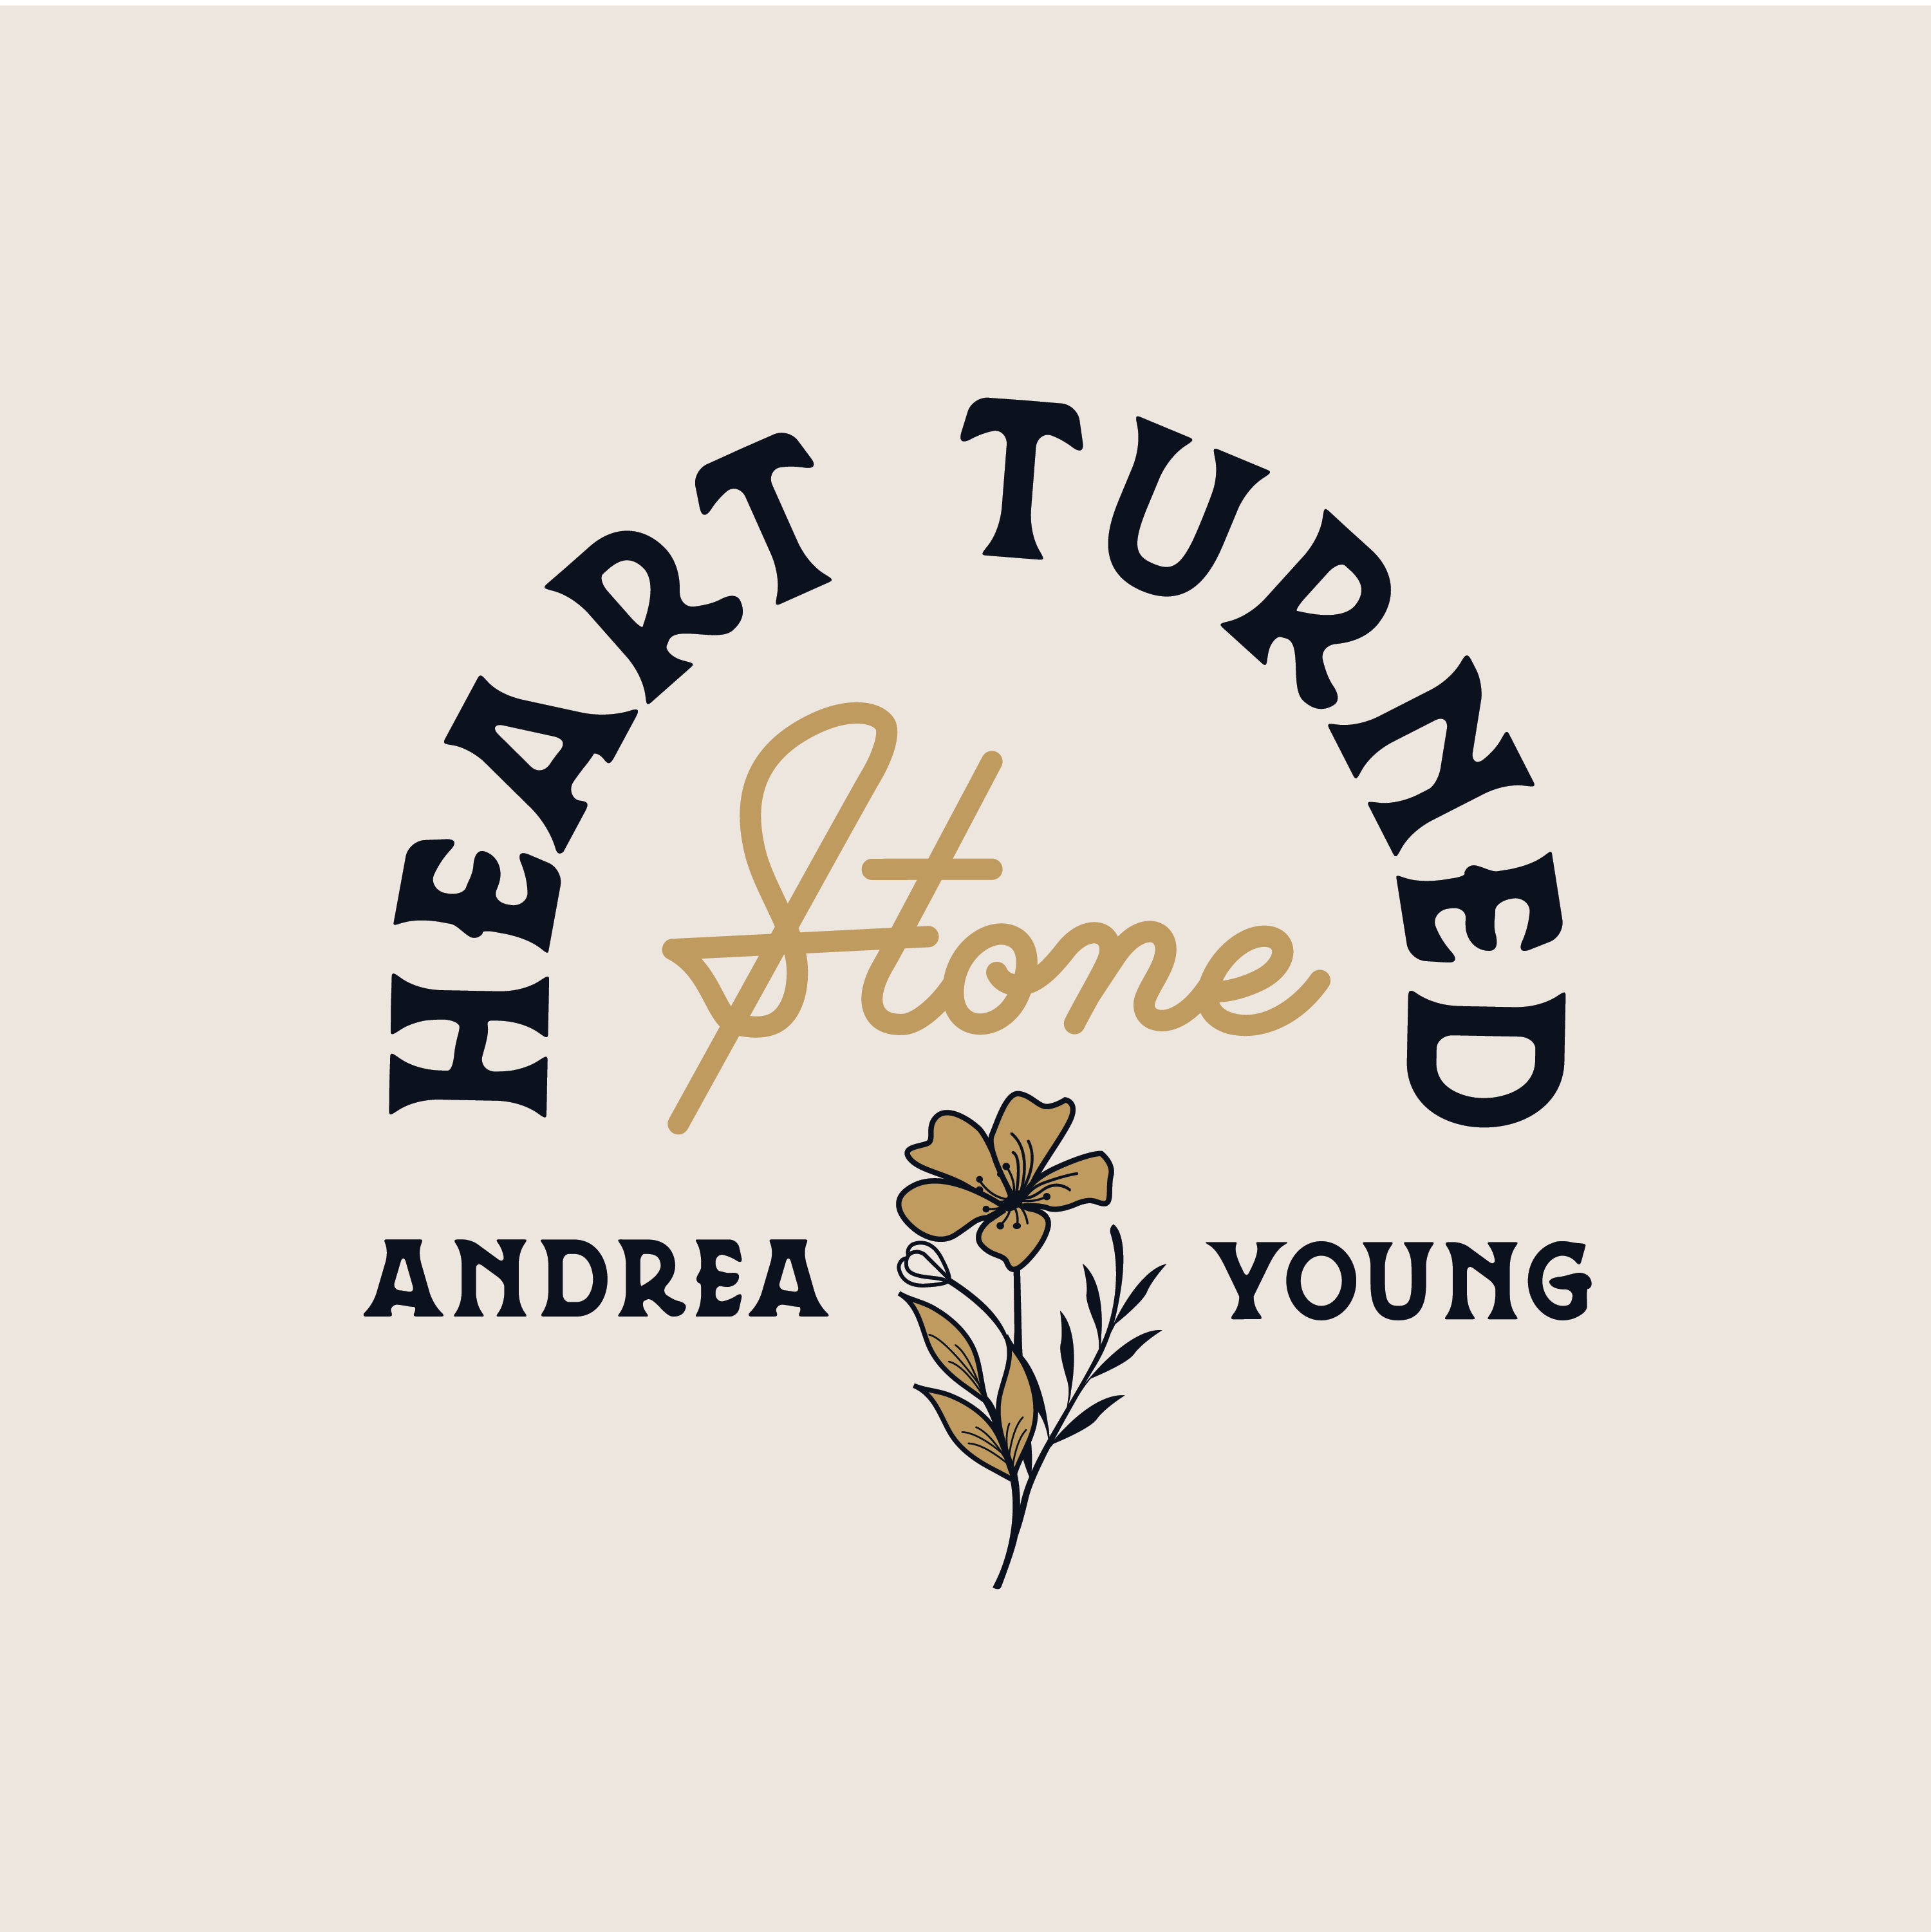 Heart Turned Stone logo design by logo designer Daphna Sebbane for your inspiration and for the worlds largest logo competition